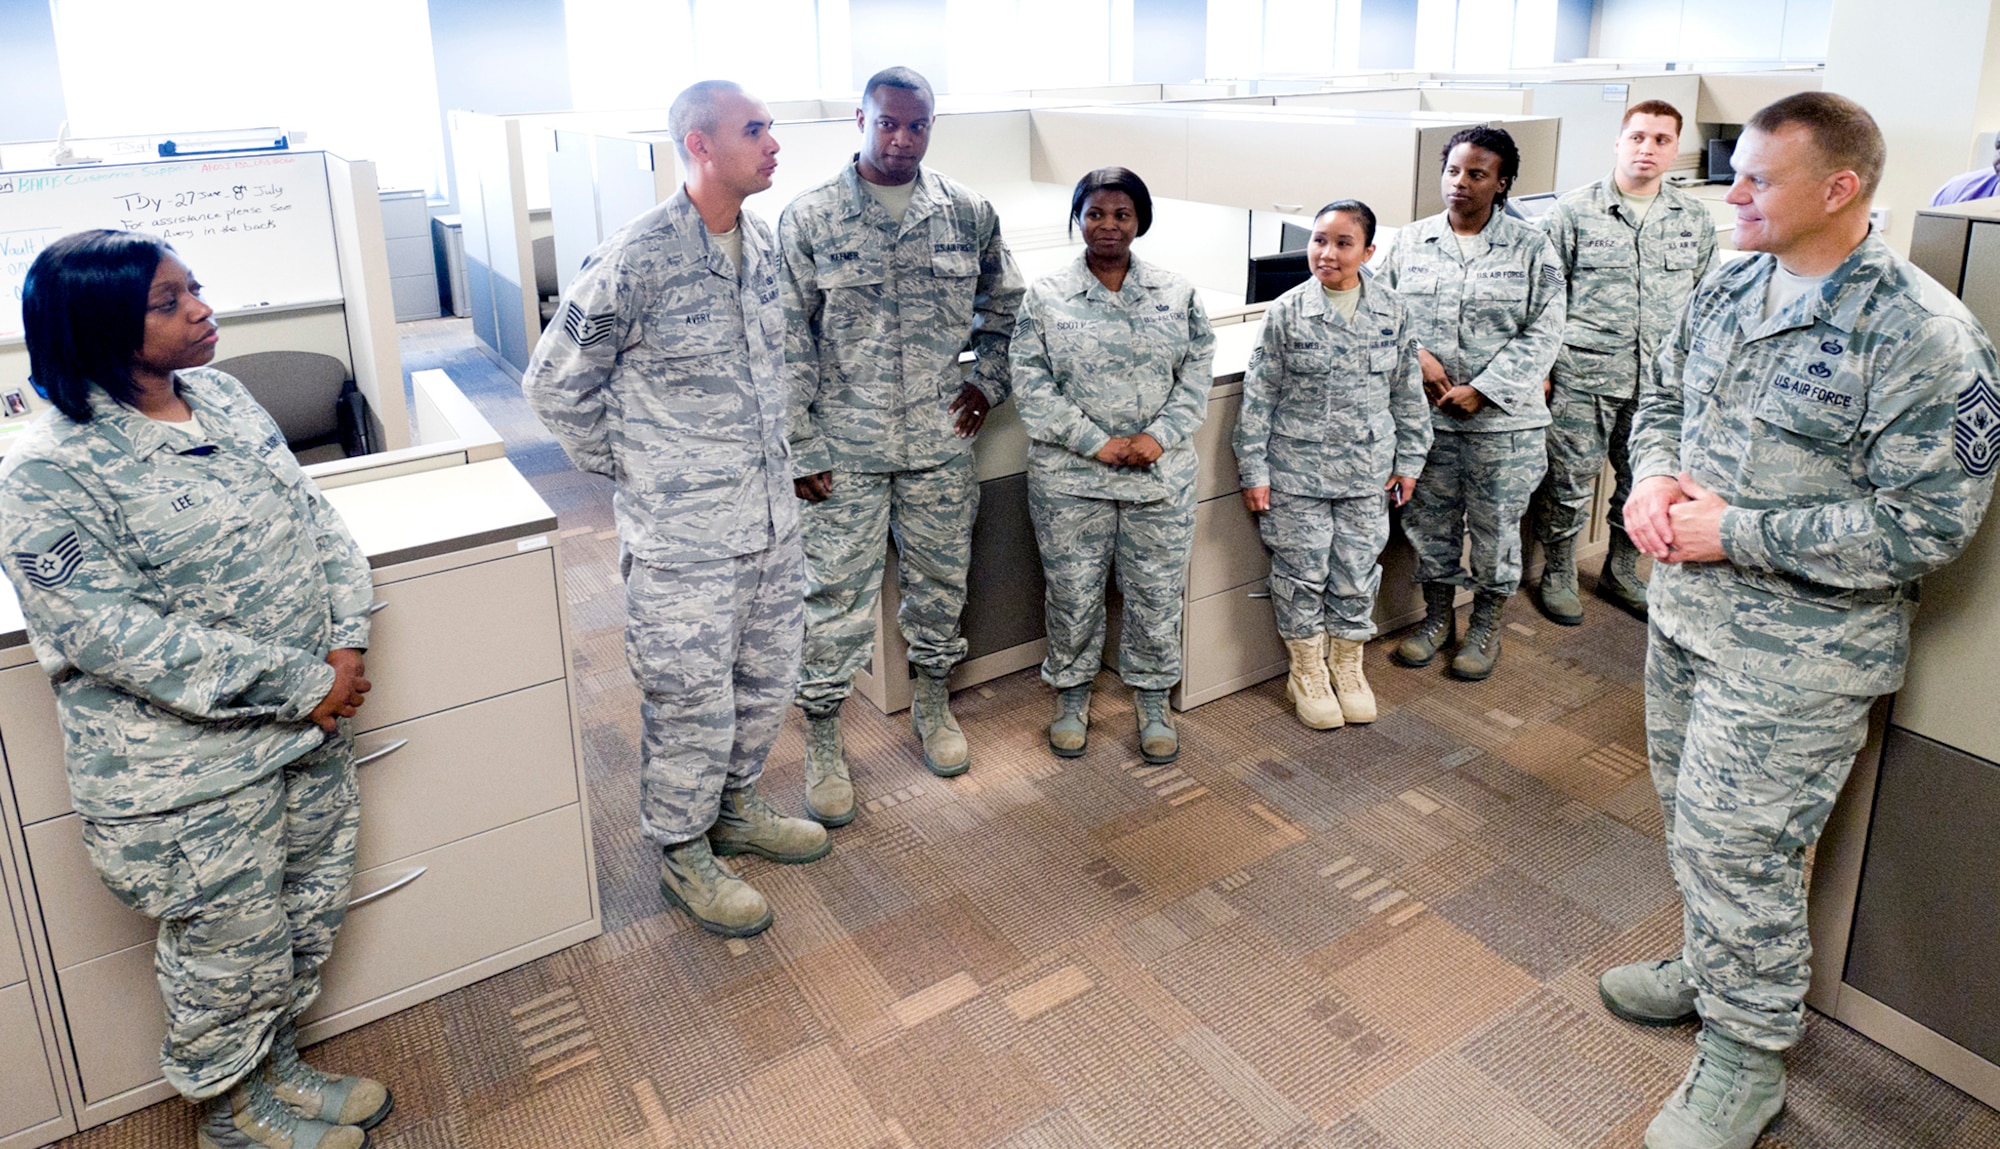 Chief Master Sergeant of the Air Force James A. Roy spends time with a group of AFOSI support staff members during his tour of the new OSI headquarters at Quantico, Va.